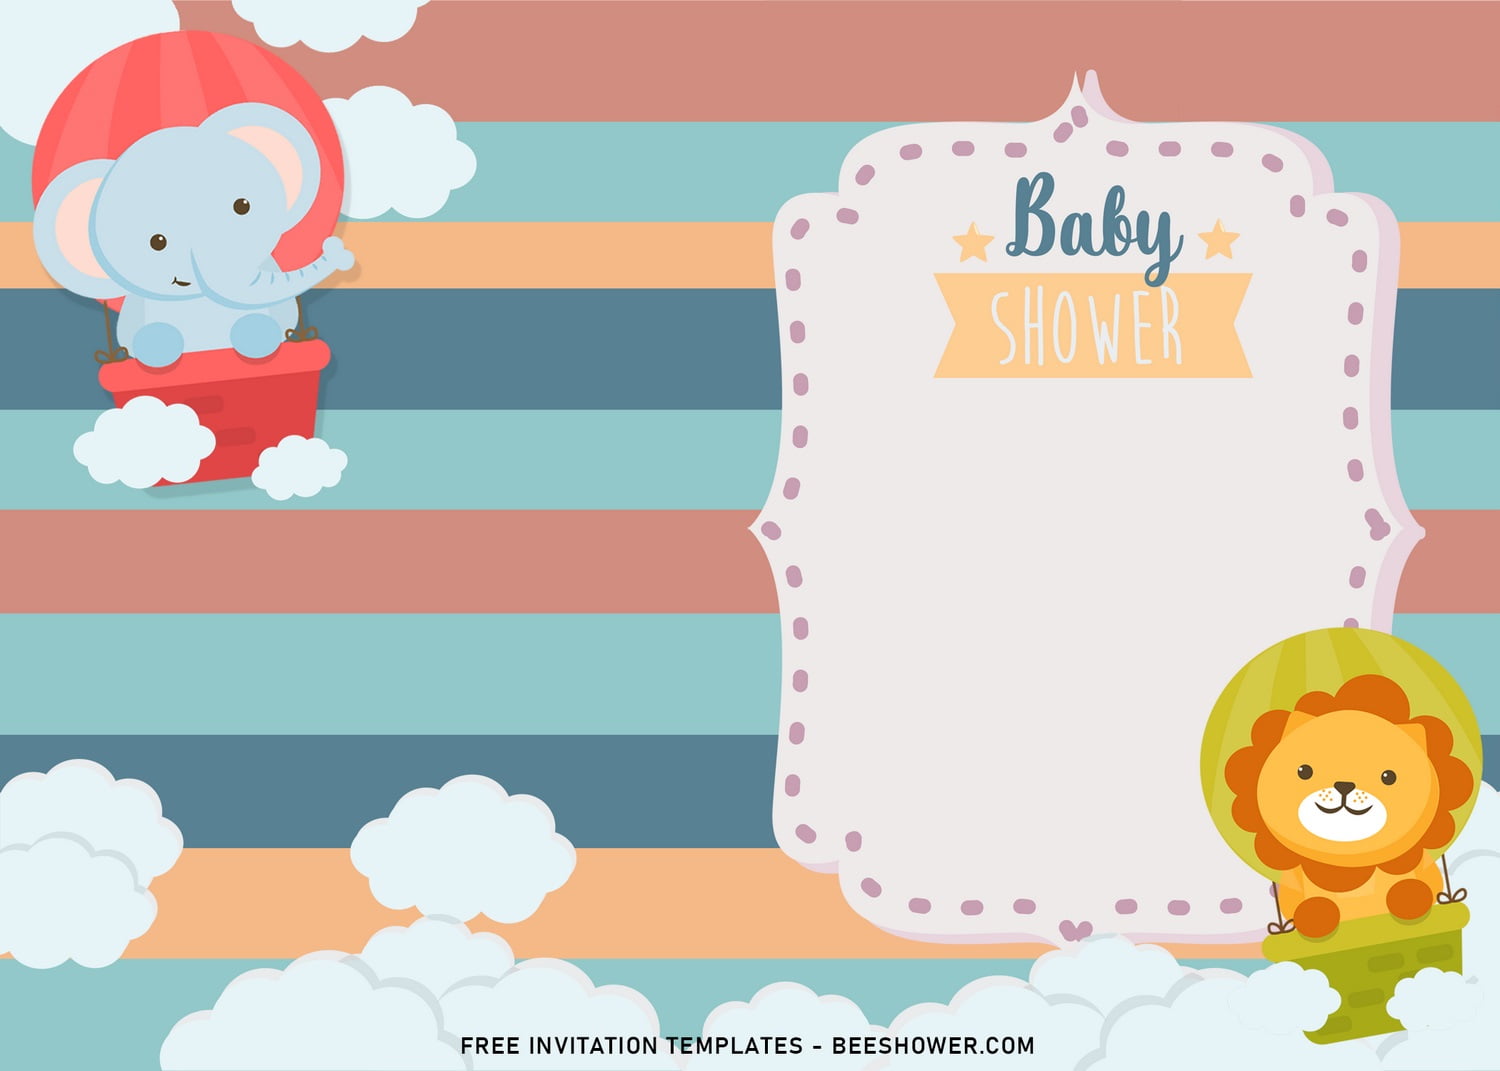 8+ Cute Baby Animals Themed Birthday Invitation Templates and has cute Baby Elephant on Hot Air Balloons